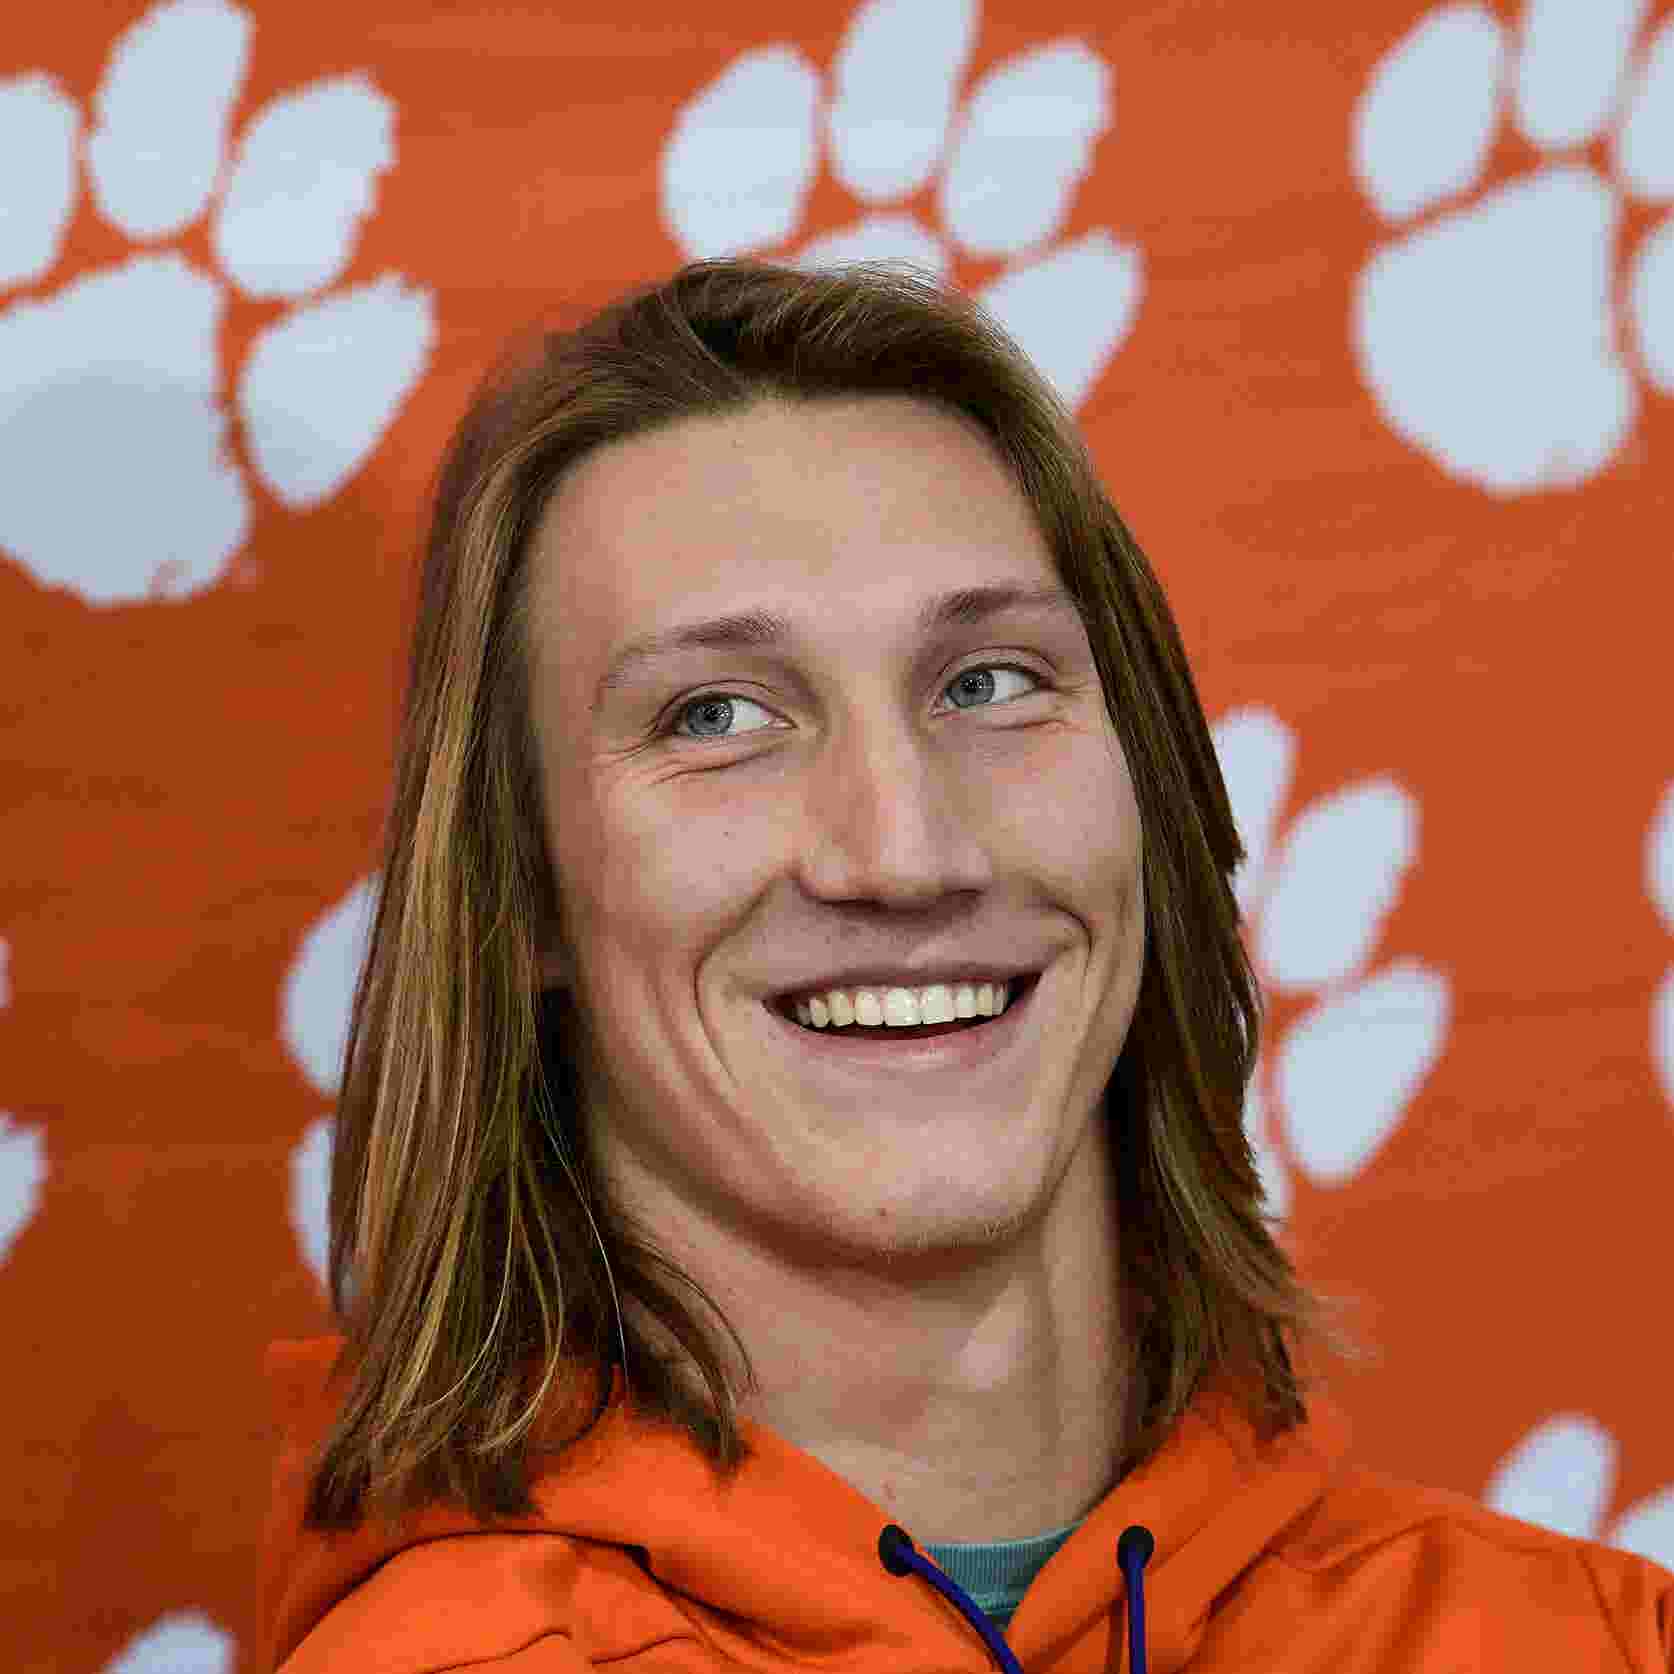 Trevor Lawrence Gets A Laugh Out Of Tik Tok Look Alikes